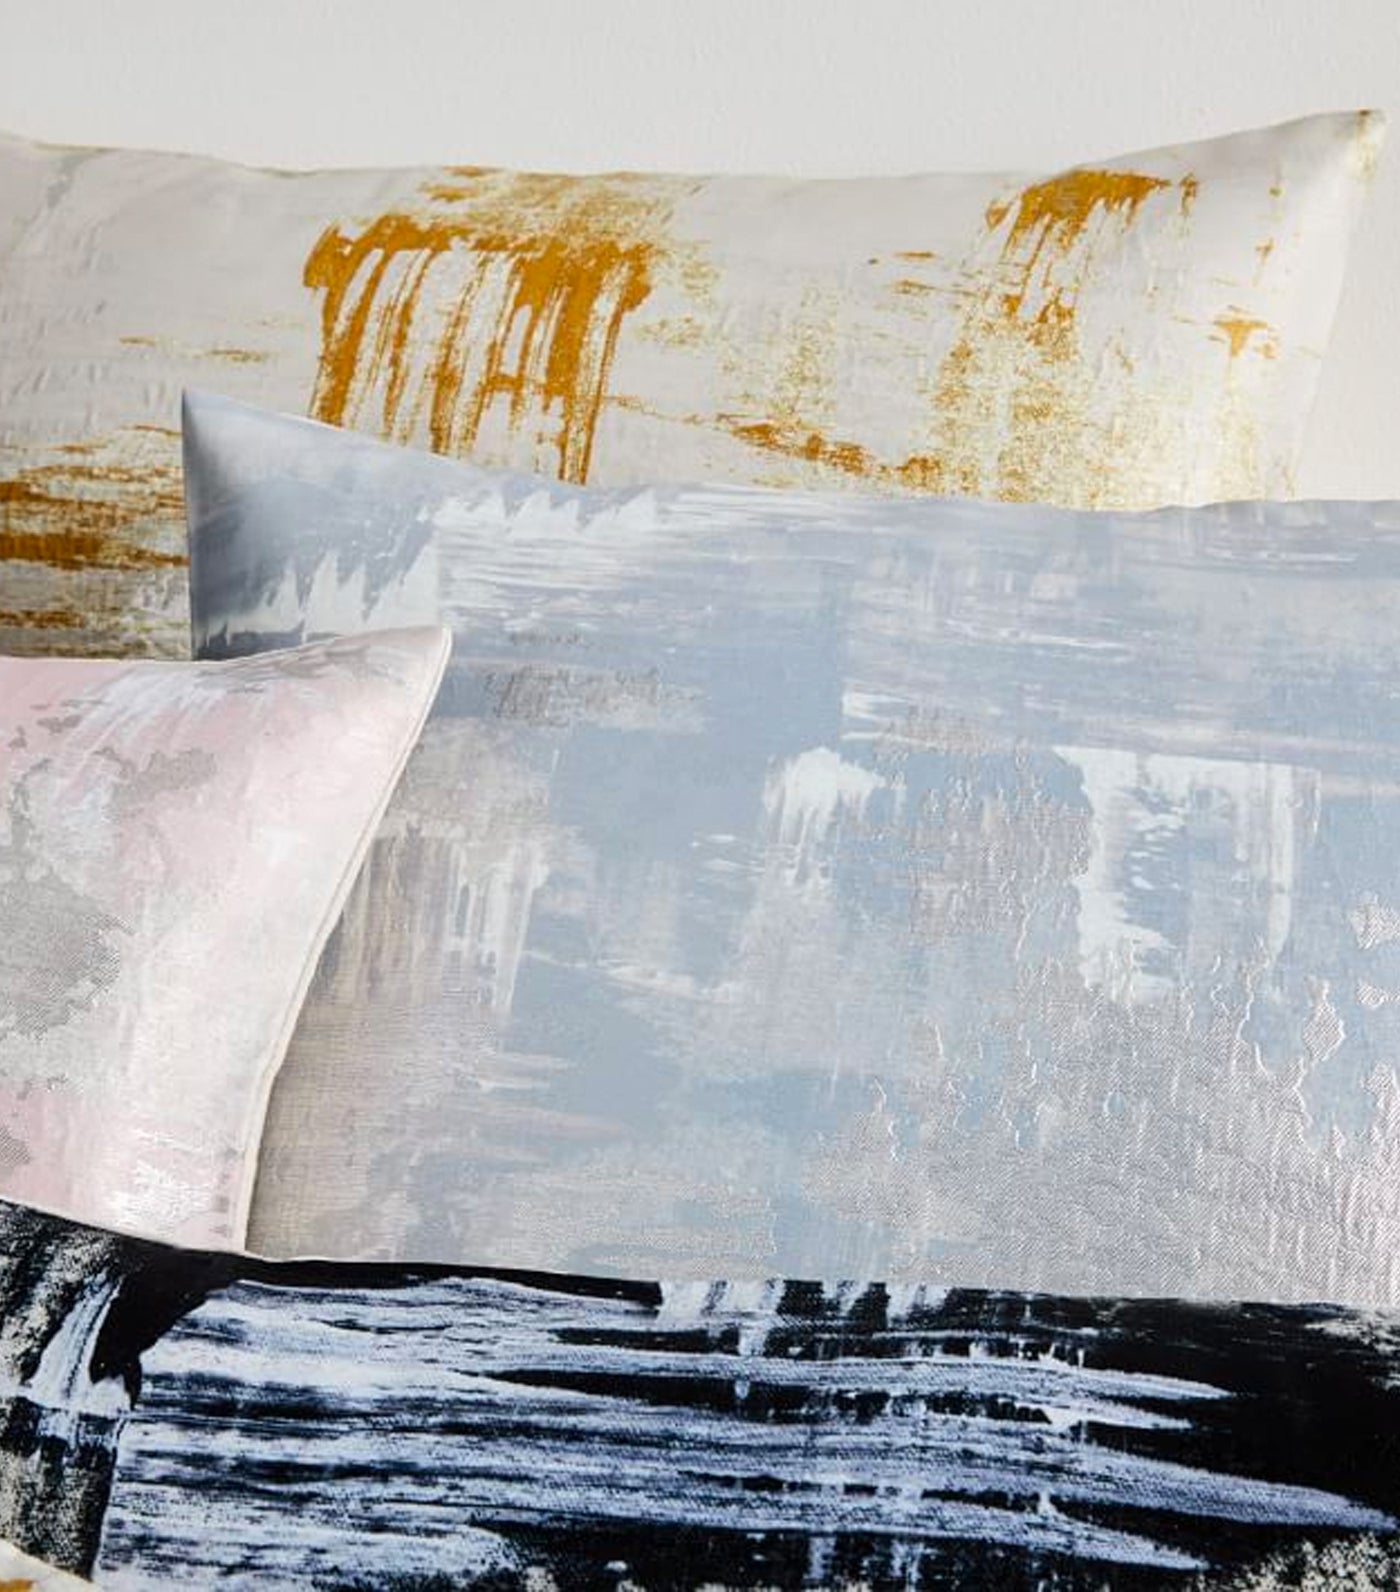 west elm Painterly Brocade Pillow Cover